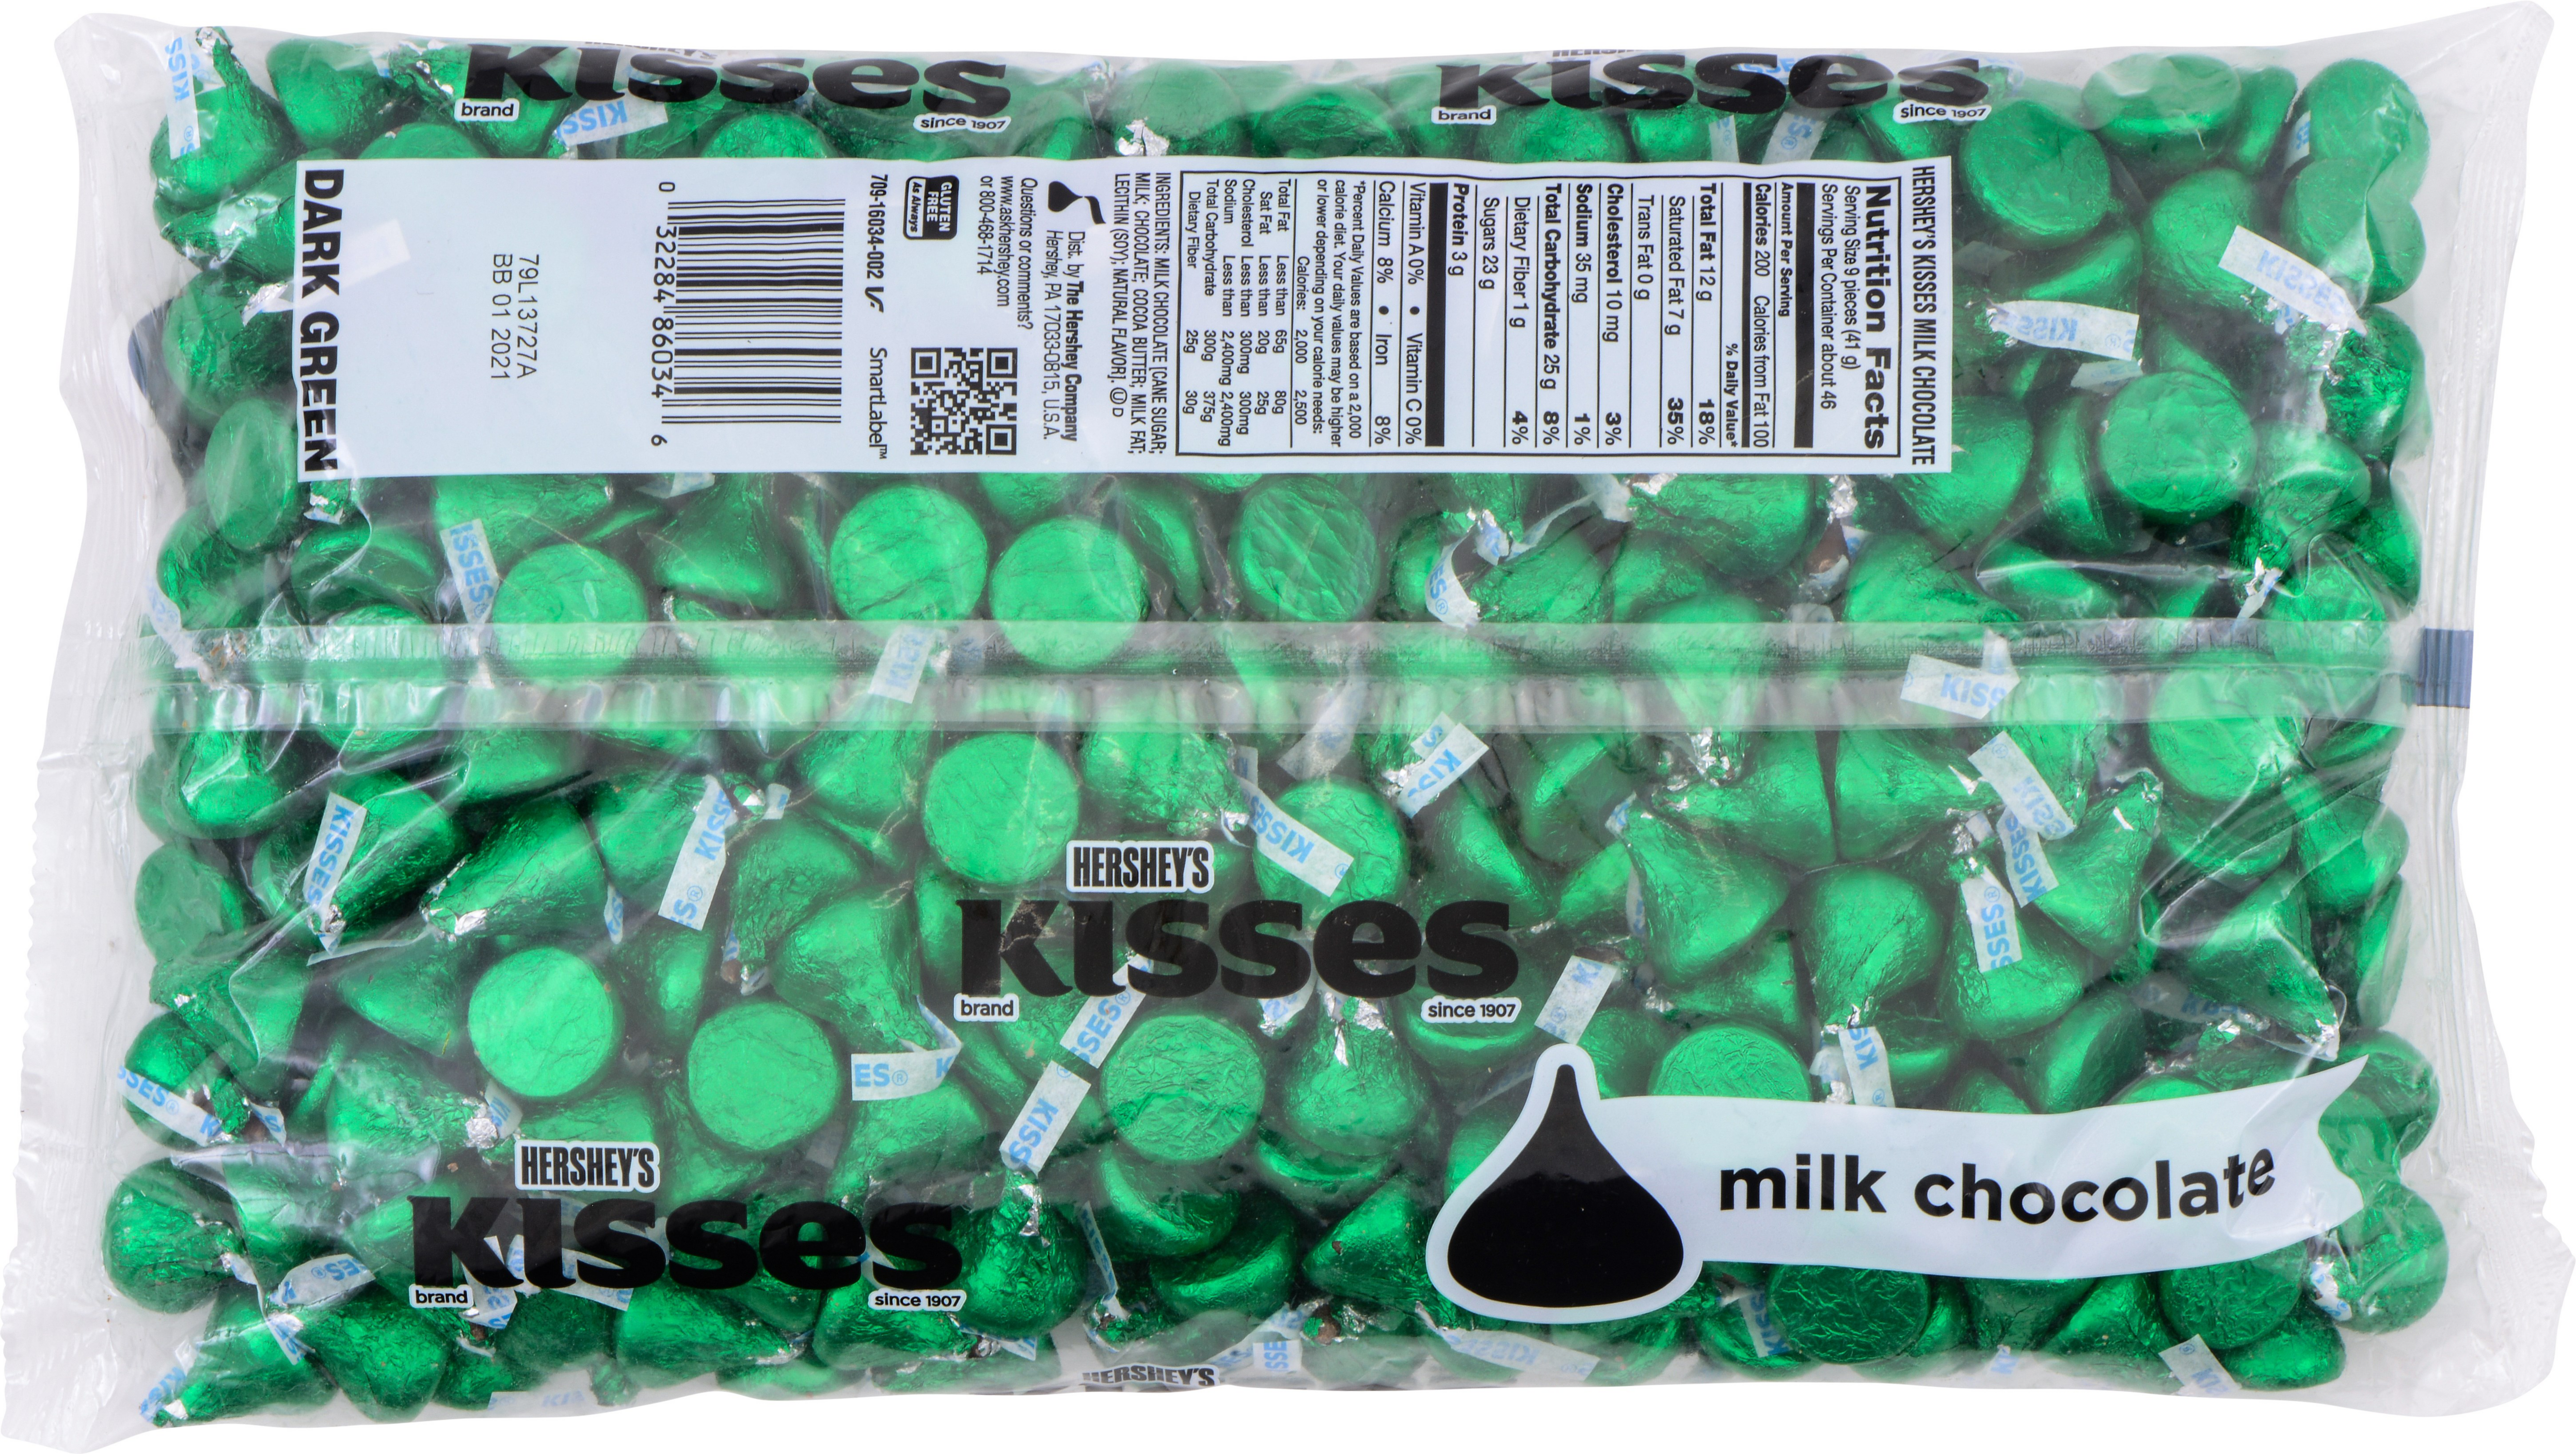 HERSHEY'S KISSES Dark Green Foil Milk Chocolate Candy, 66.67 oz bag, 400 pieces - Back of Package